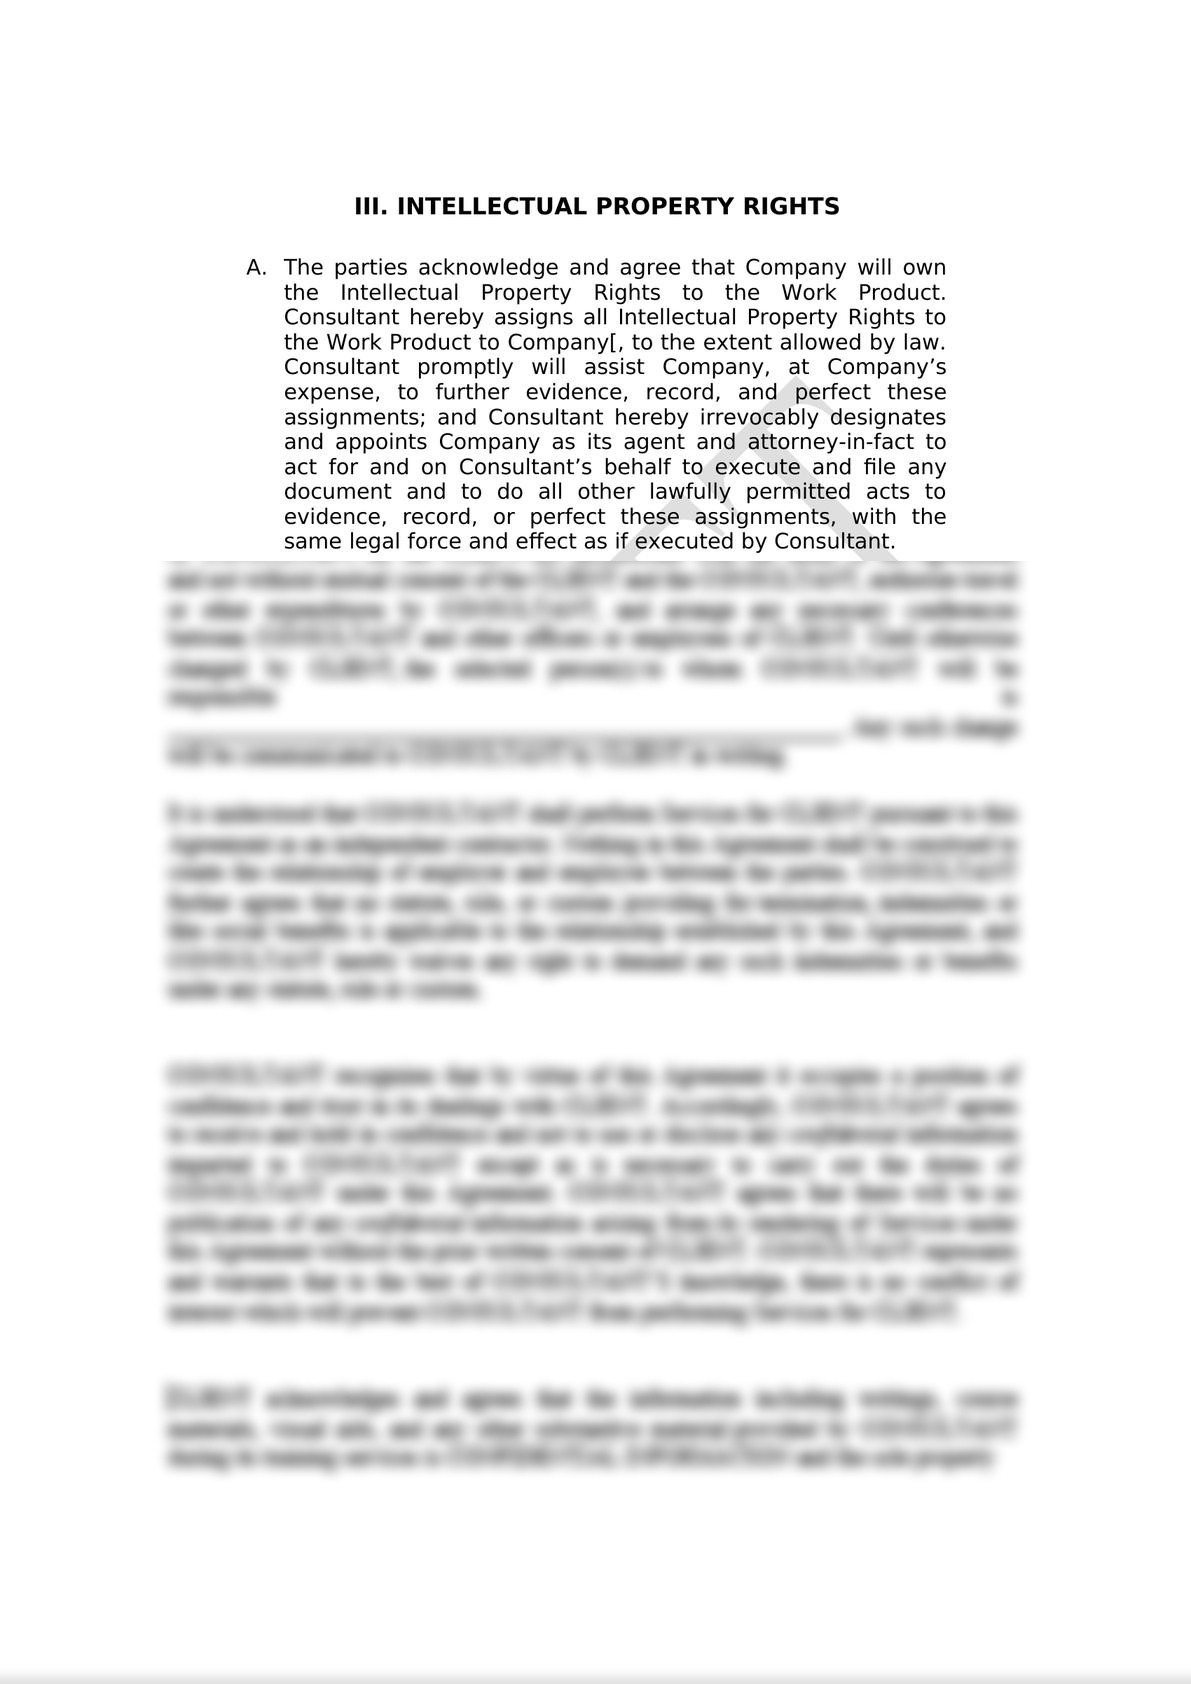 Consulting Agreement (IP Context)-2